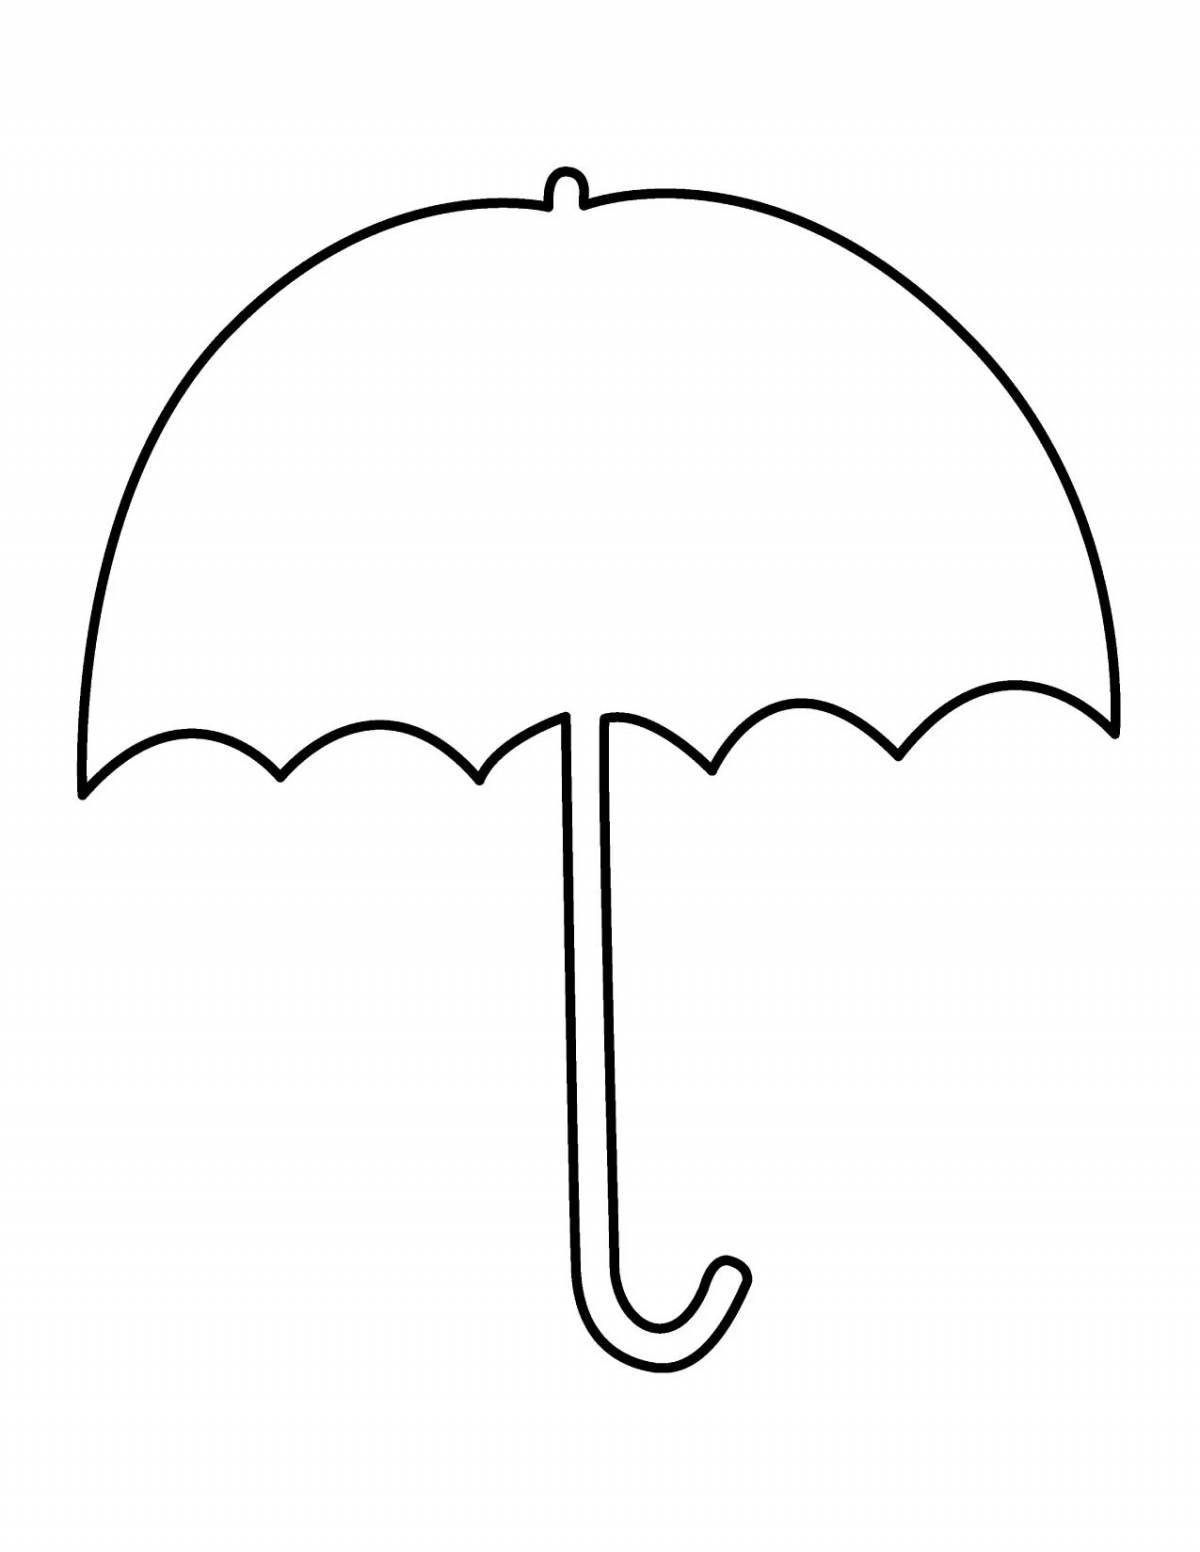 Coloring rainbow umbrella for 3-4 year olds